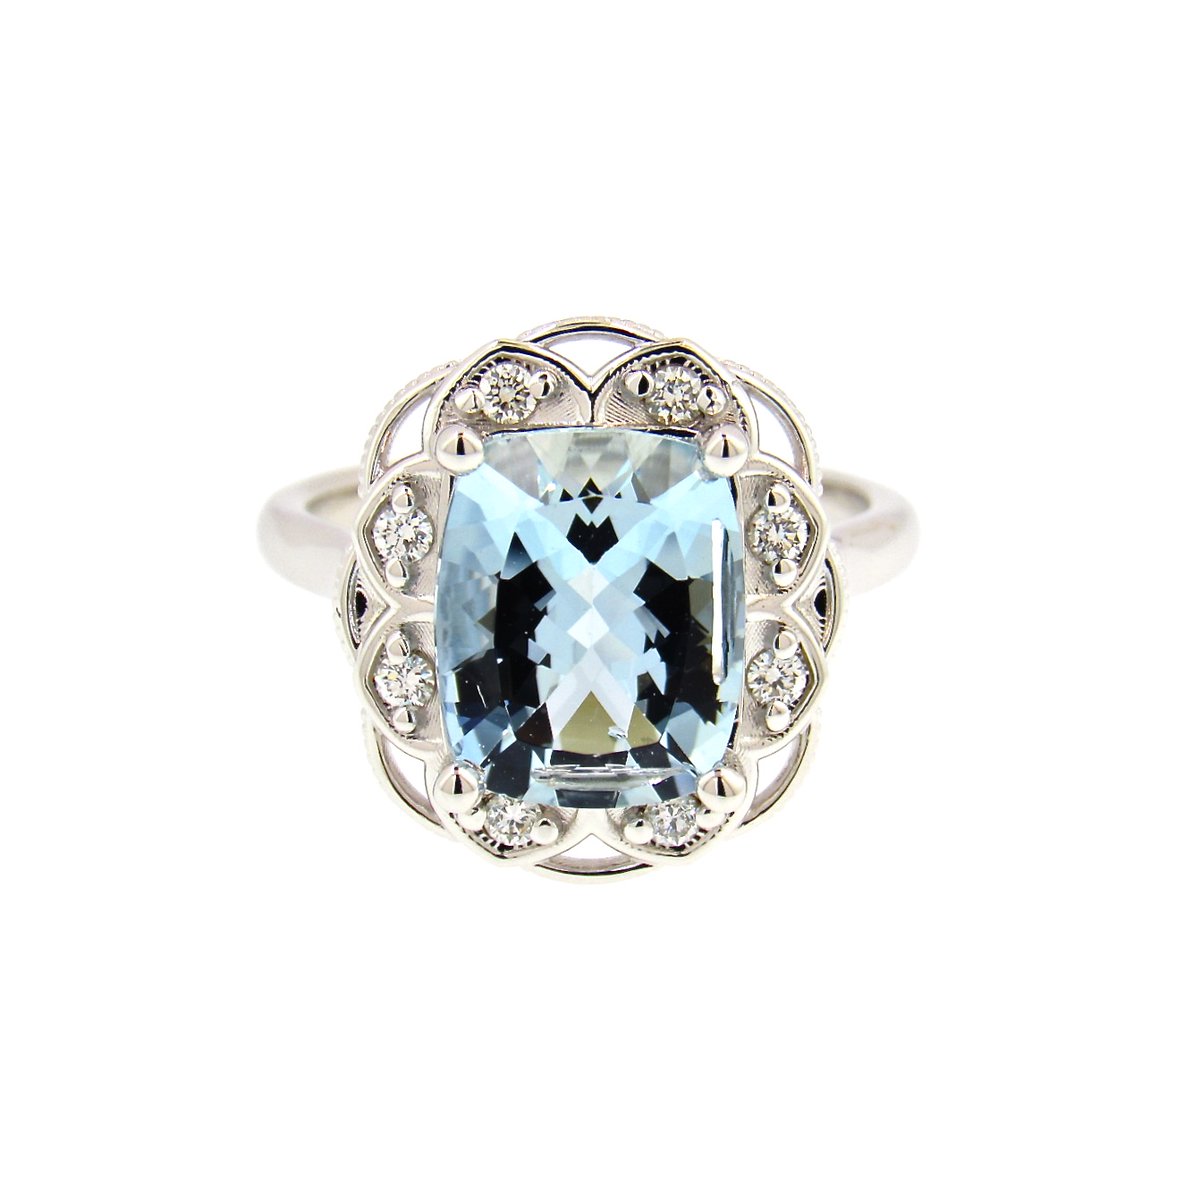 Mathew Jewelers On Twitter Happy Birthday To Our March Babes Fun Fact About Your Birthstone Aquamarine The Name Aquamarine Is Derived From The Latin Word Aqua Meaning Water And Marina Meaning